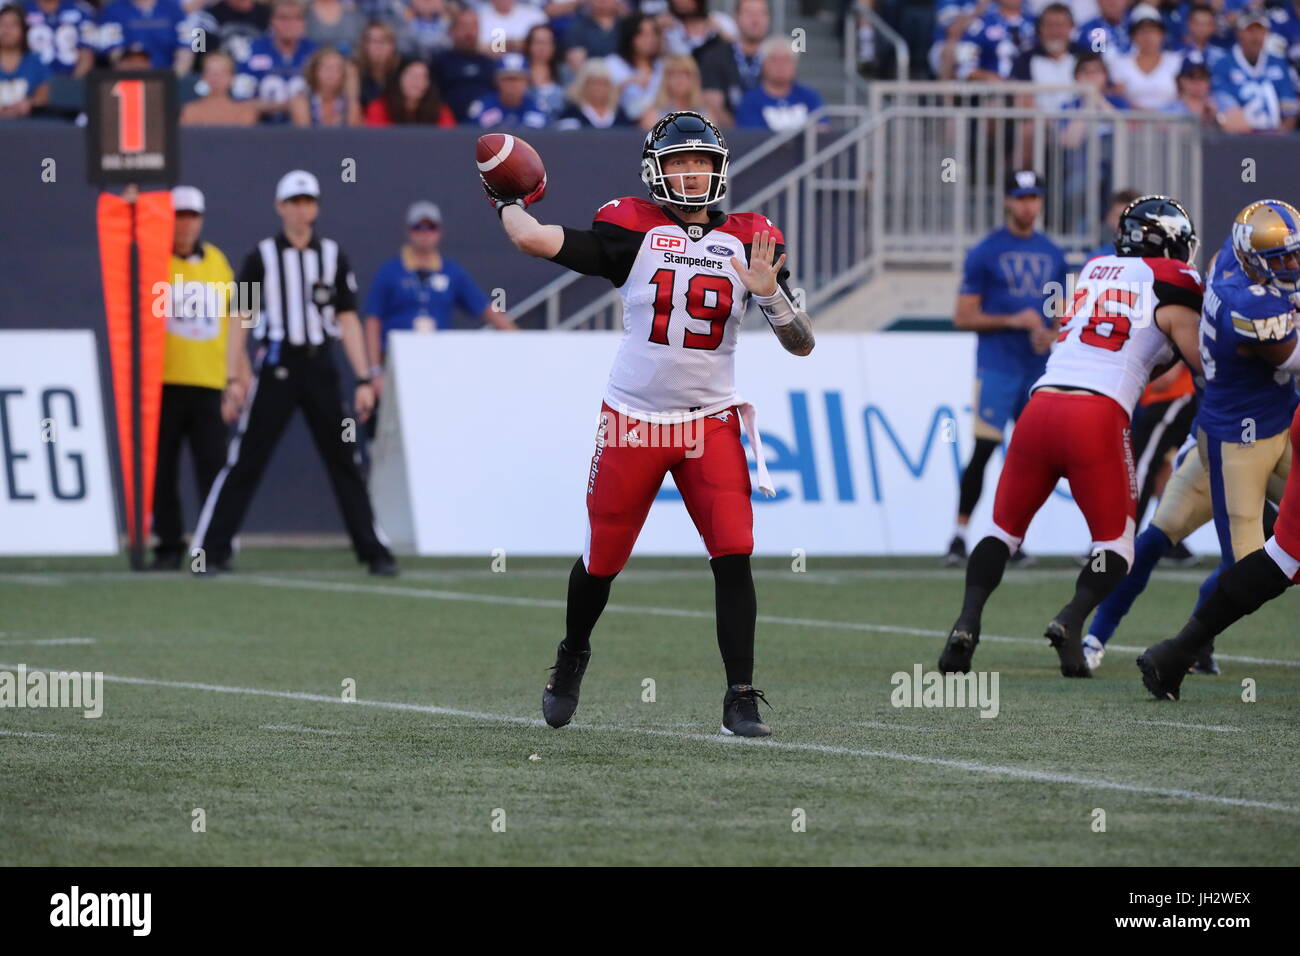 Winnipeg, Manitoba, CAN. 7th July, 2017. July 7, 2017; Winnipeg, Manitoba, CAN; Calgary Stampeders quarterback Bo Levi Mitchell (19) looks to the sidelines as he prepares to throw the ball during the first quarter against the Winnipeg Blue Bombers at Investors Group Field. Mandatory Credit: Bruce Fedyck- Zuma Media Credit: Bruce Fedyck/ZUMA Wire/Alamy Live News Stock Photo